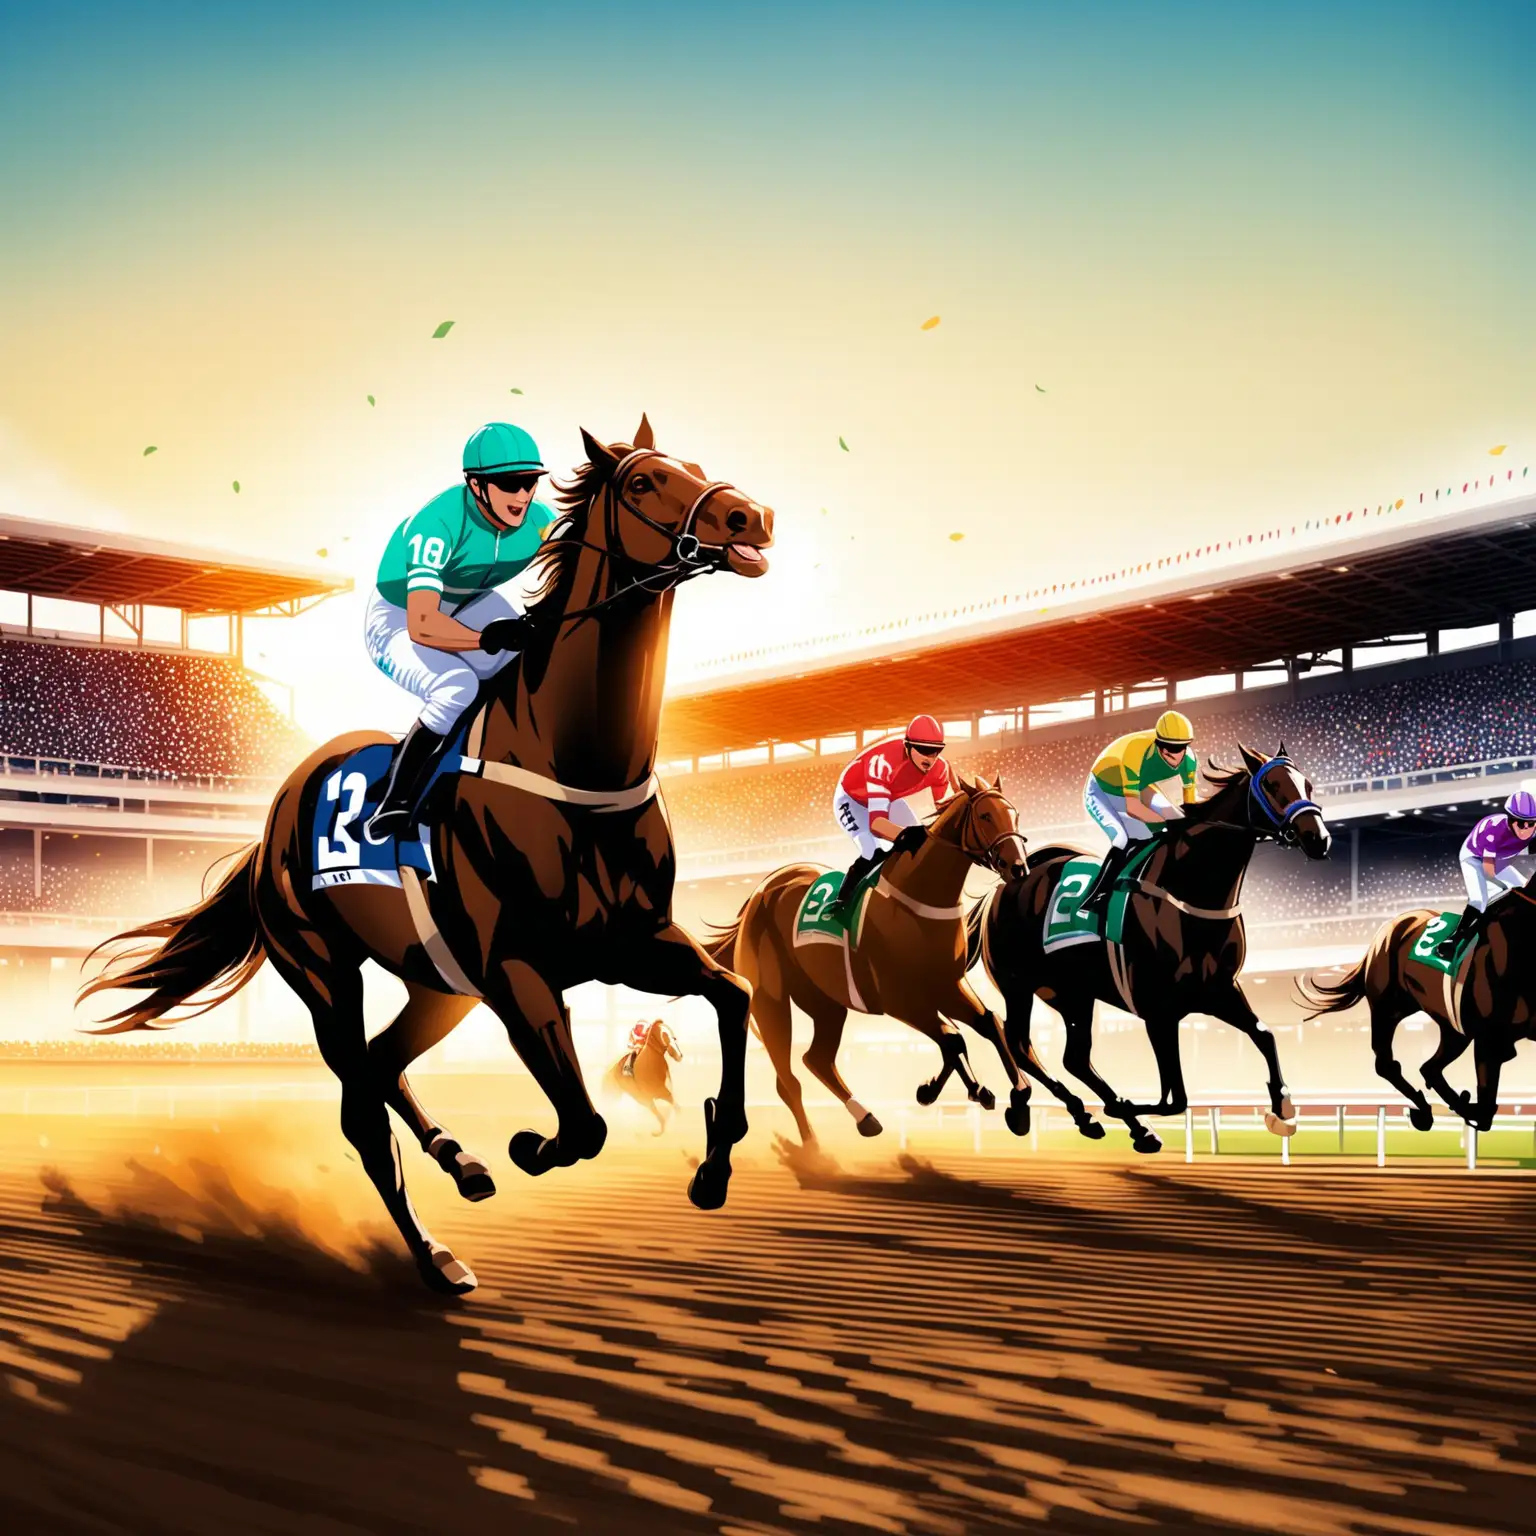 Create image of fans partying on the in filed of a horse track stadium